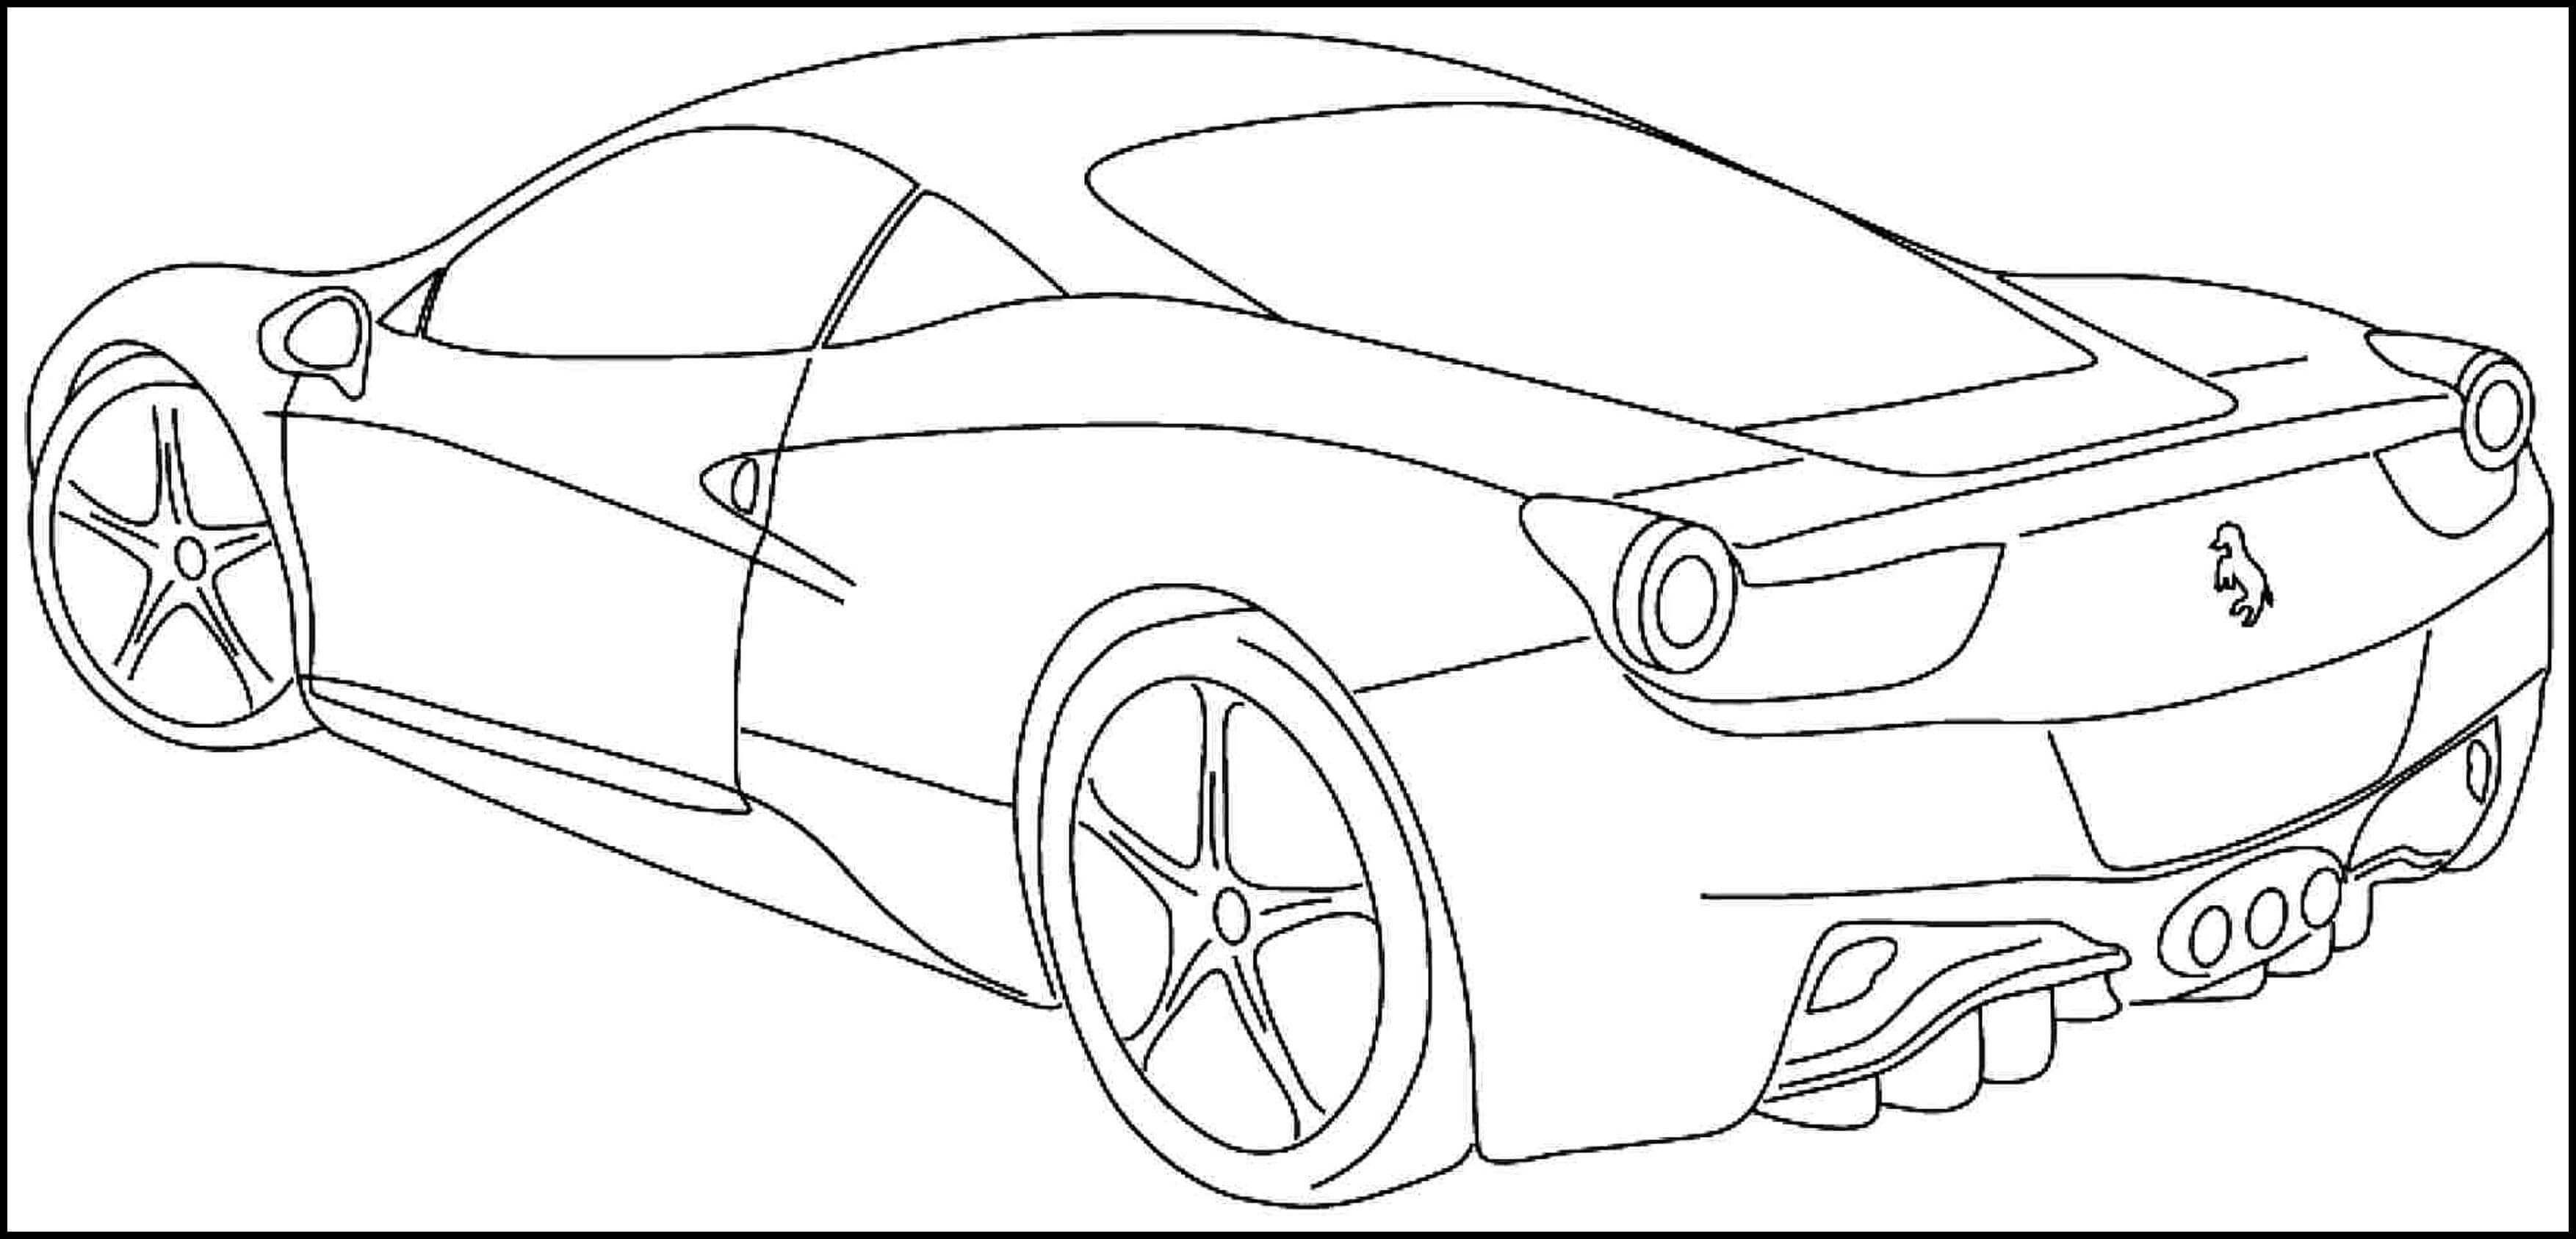 Cars Coloring Pages For Teens
 Printable sports car coloring pages for kids & teens